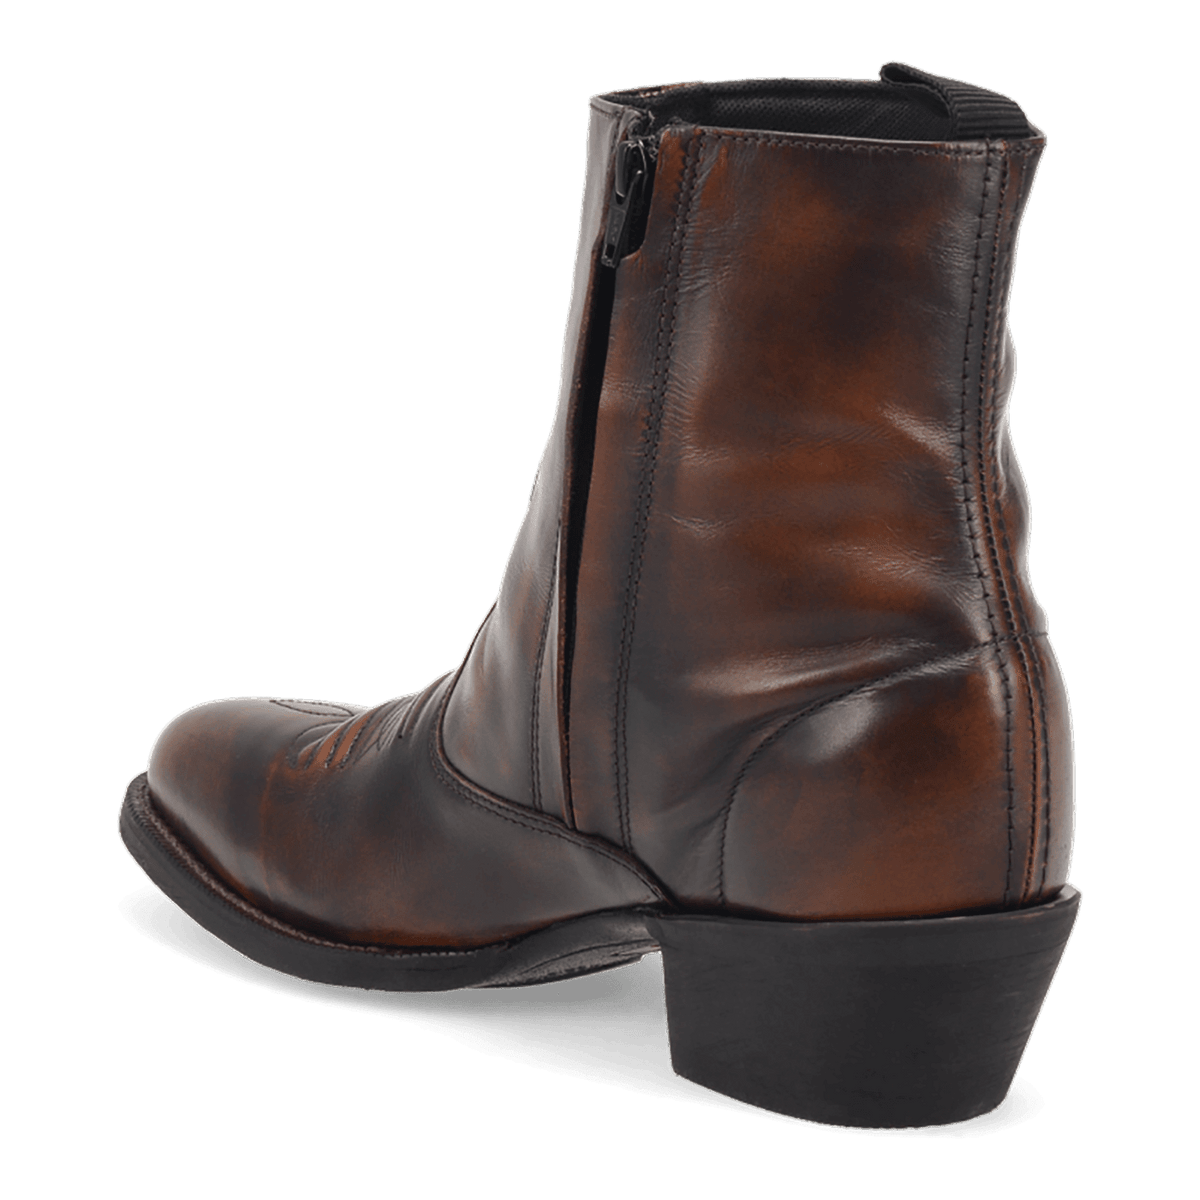 FLETCHER LEATHER BOOT Image